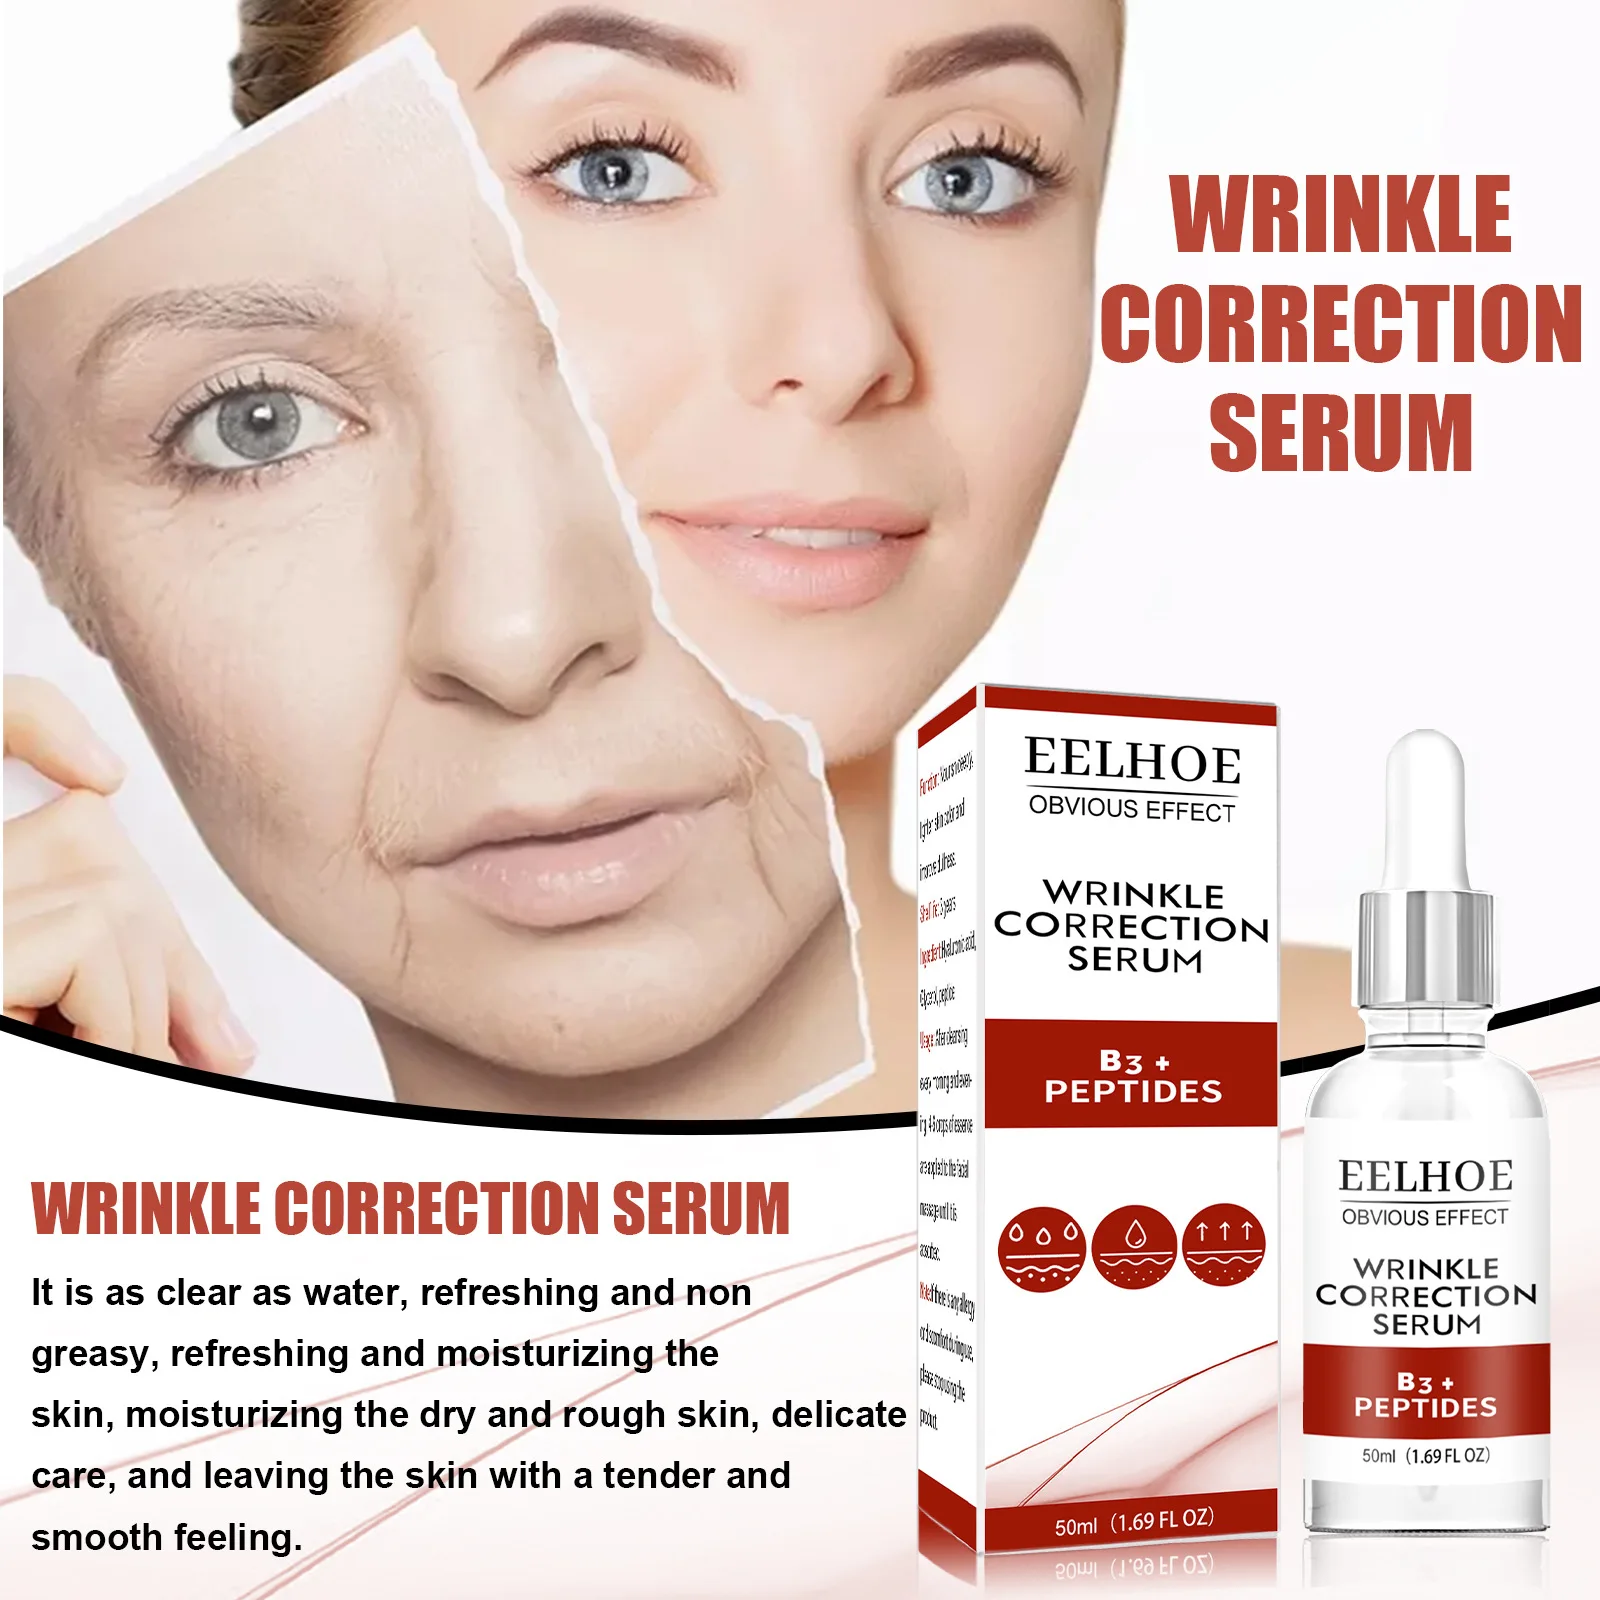 

B3 Peptide Remove Wrinkle Serum Firming Lifting Anti-Aging Fade Fine Lines Face Essence For Treatment Facial lines Forehead